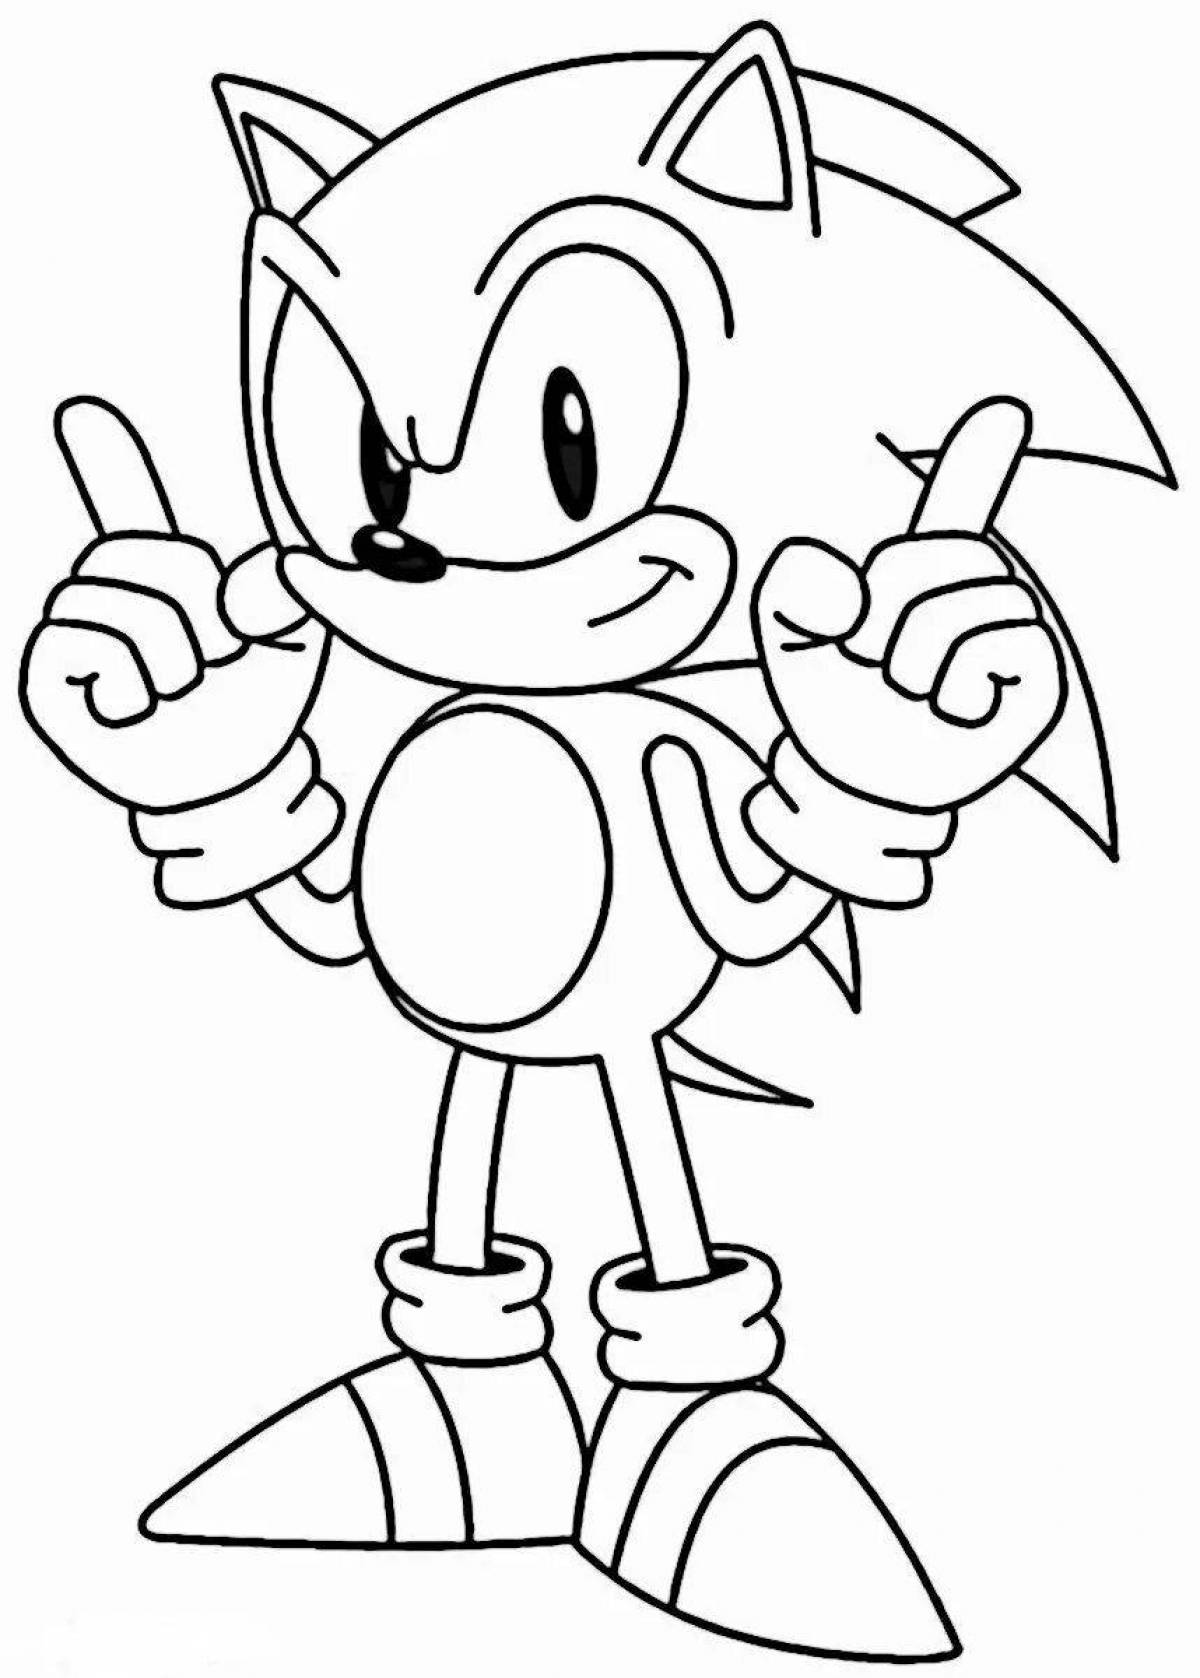 Animated sonic the hedgehog coloring book